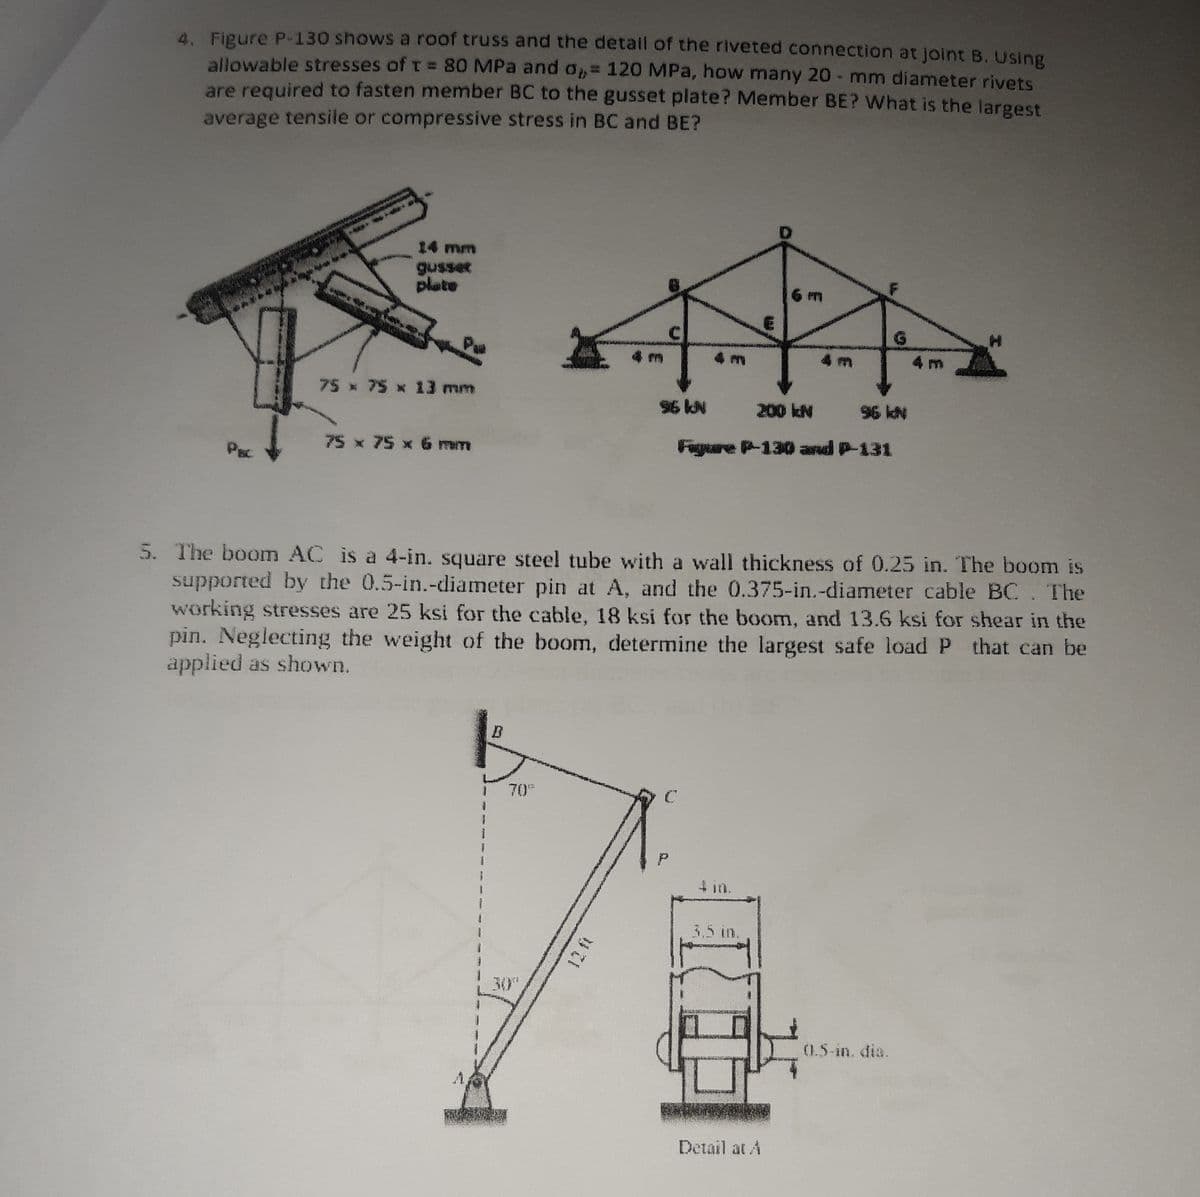 4. Figure P-130 shows a roof truss and the detail of the riveted connection at joint B. Using
allowable stresses of T = 80 MPa and o= 120 MPa, how many 20 - mm diameter rivets
are required to fasten member BC to the gusset plate? Member BE? What is the largest
average tensile or compressive stress in BC and BE?
14 mm
plate
6 m
C
G.
4 m
75 x 75 x 13 mm
96 kN
200 kN
96 kN
N
75 x 75 x 6 mm
Figure P-130 and P-131
PBC
5. The boom AC is a 4-in. square steel tube with a wall thickness of 0.25 in. The boom is
supported by the 0.5-in.-diameter pin at A, and the 0.375-in.-diameter cable BC. The
working stresses are 25 ksi for the cable, 18 ksi for the boom, and 13.6 ksi for shear in the
pin. Neglecting the weight of the boom, determine the largest safe load P that can be
applied as shown.
70
4 in.
3.5 in.
30
0.5-in. dia.
A.
Detail at A
